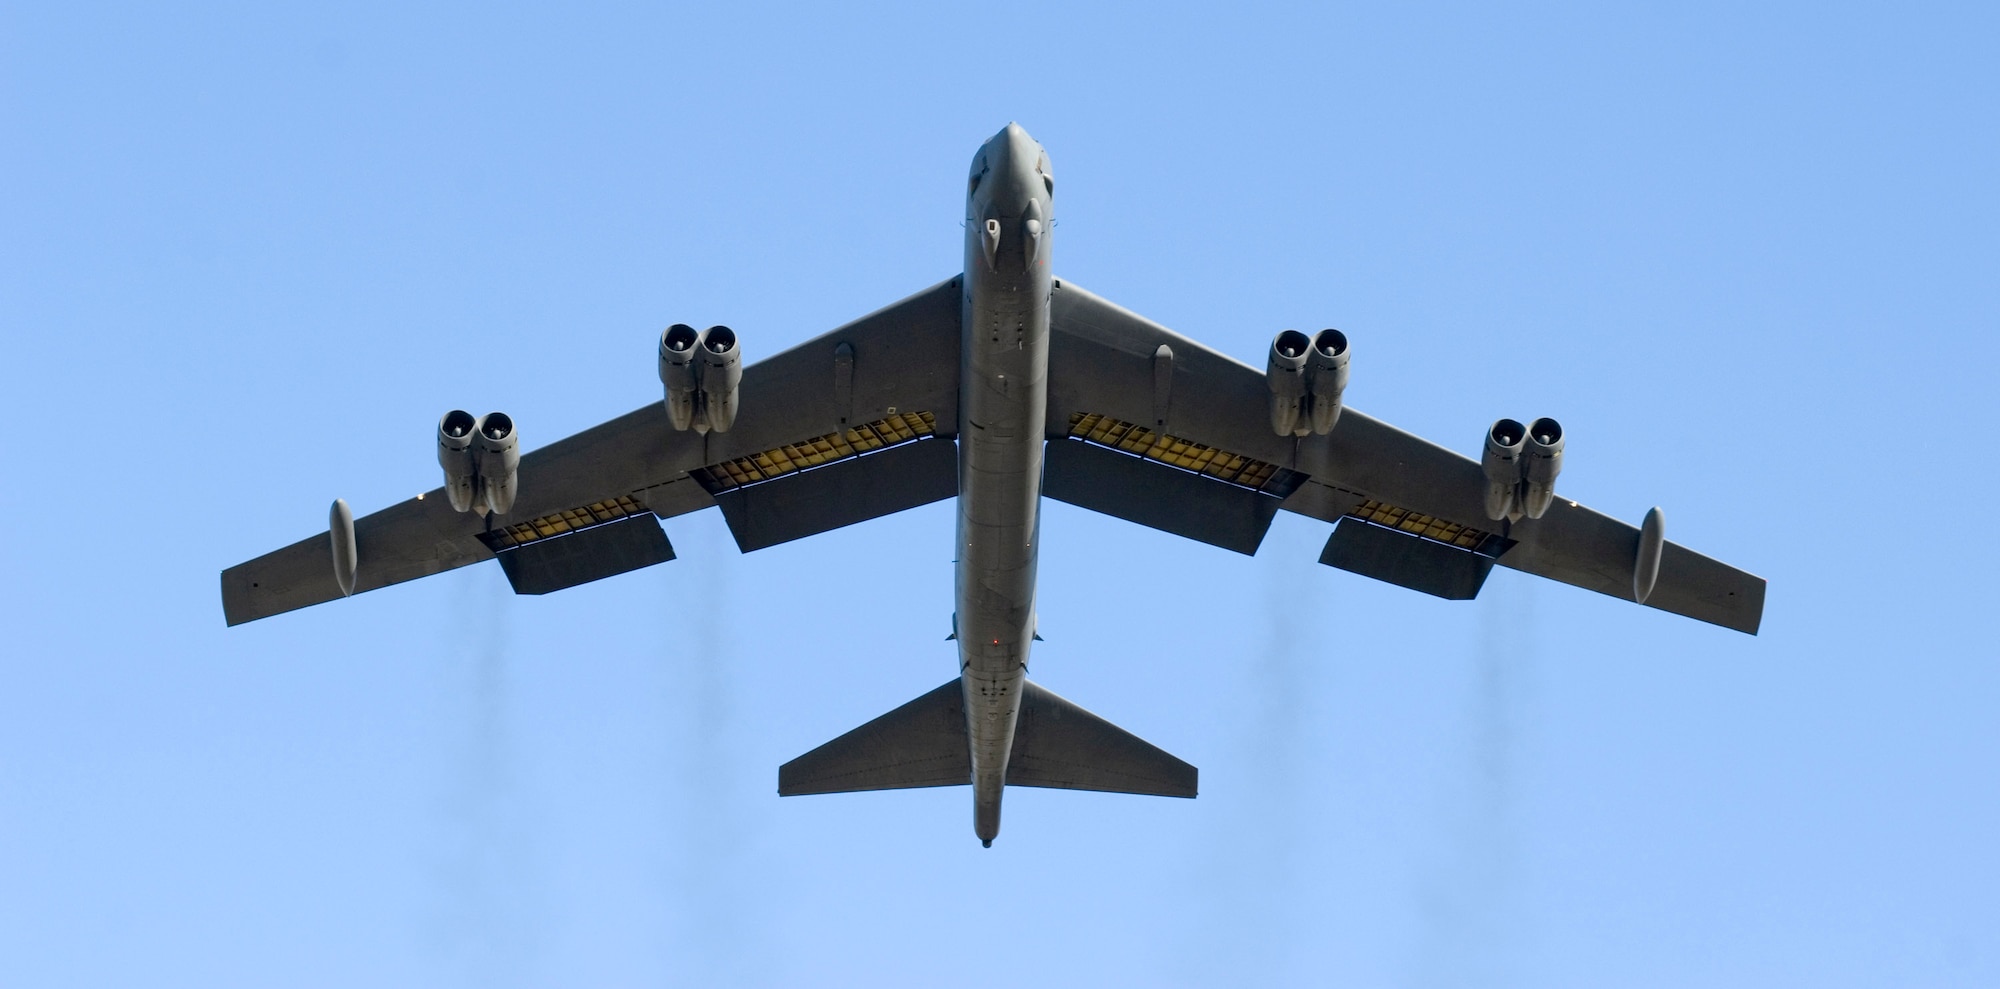 Two B-52 Stratofortress bombers, like one shown here, completed a long-range training sortie from Andersen Air Force Base, Guam, to Australia's Delamere Air Weapons Range in the Northern Territory Oct. 24. The B-52s, from the 23rd Expeditionary Bomb Squadron, are part of the "Green Lightning" sortie, only the second of its kind. (U.S. Air Force photo/Master Sgt. Lance Cheung) 